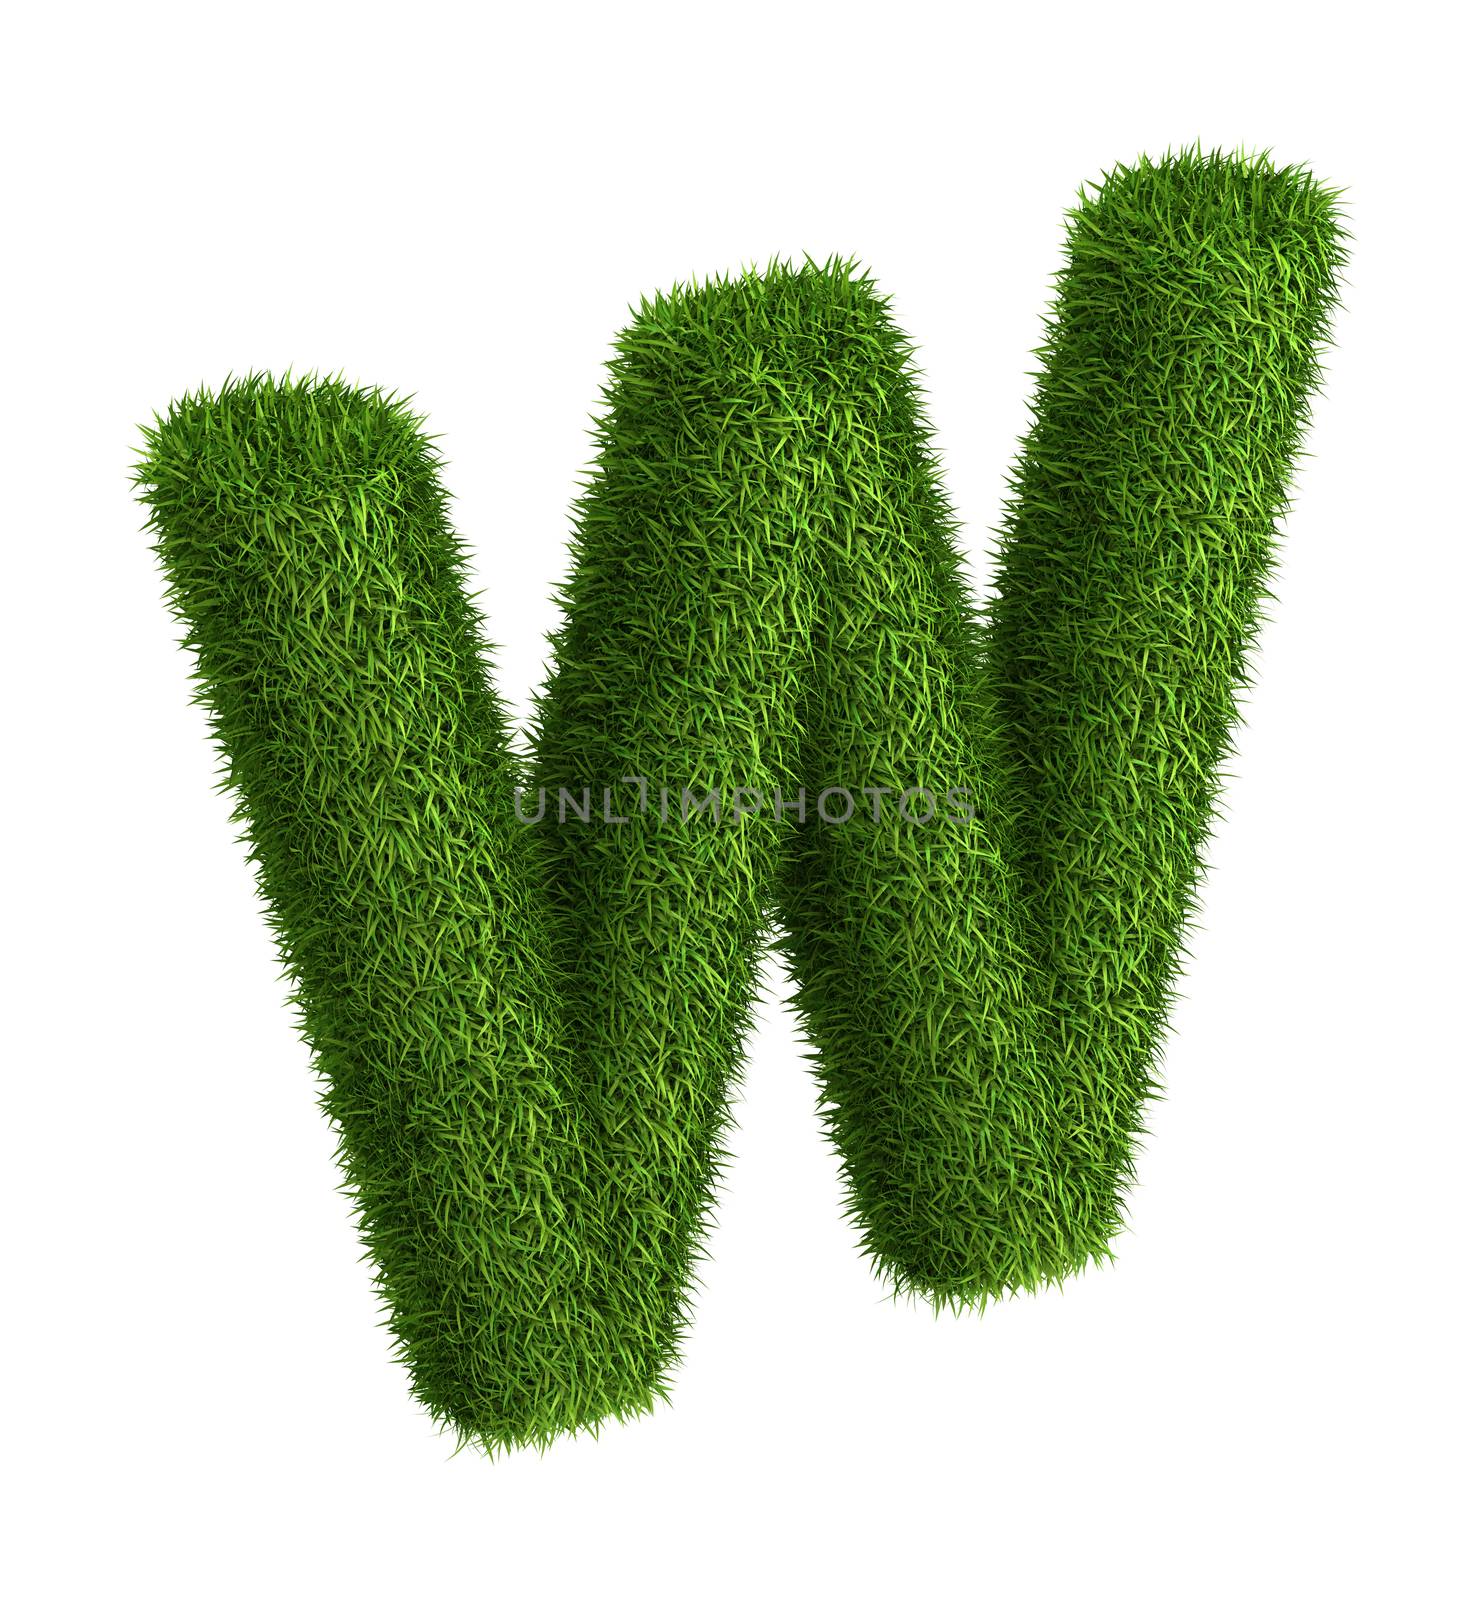 Natural grass letter W by iunewind